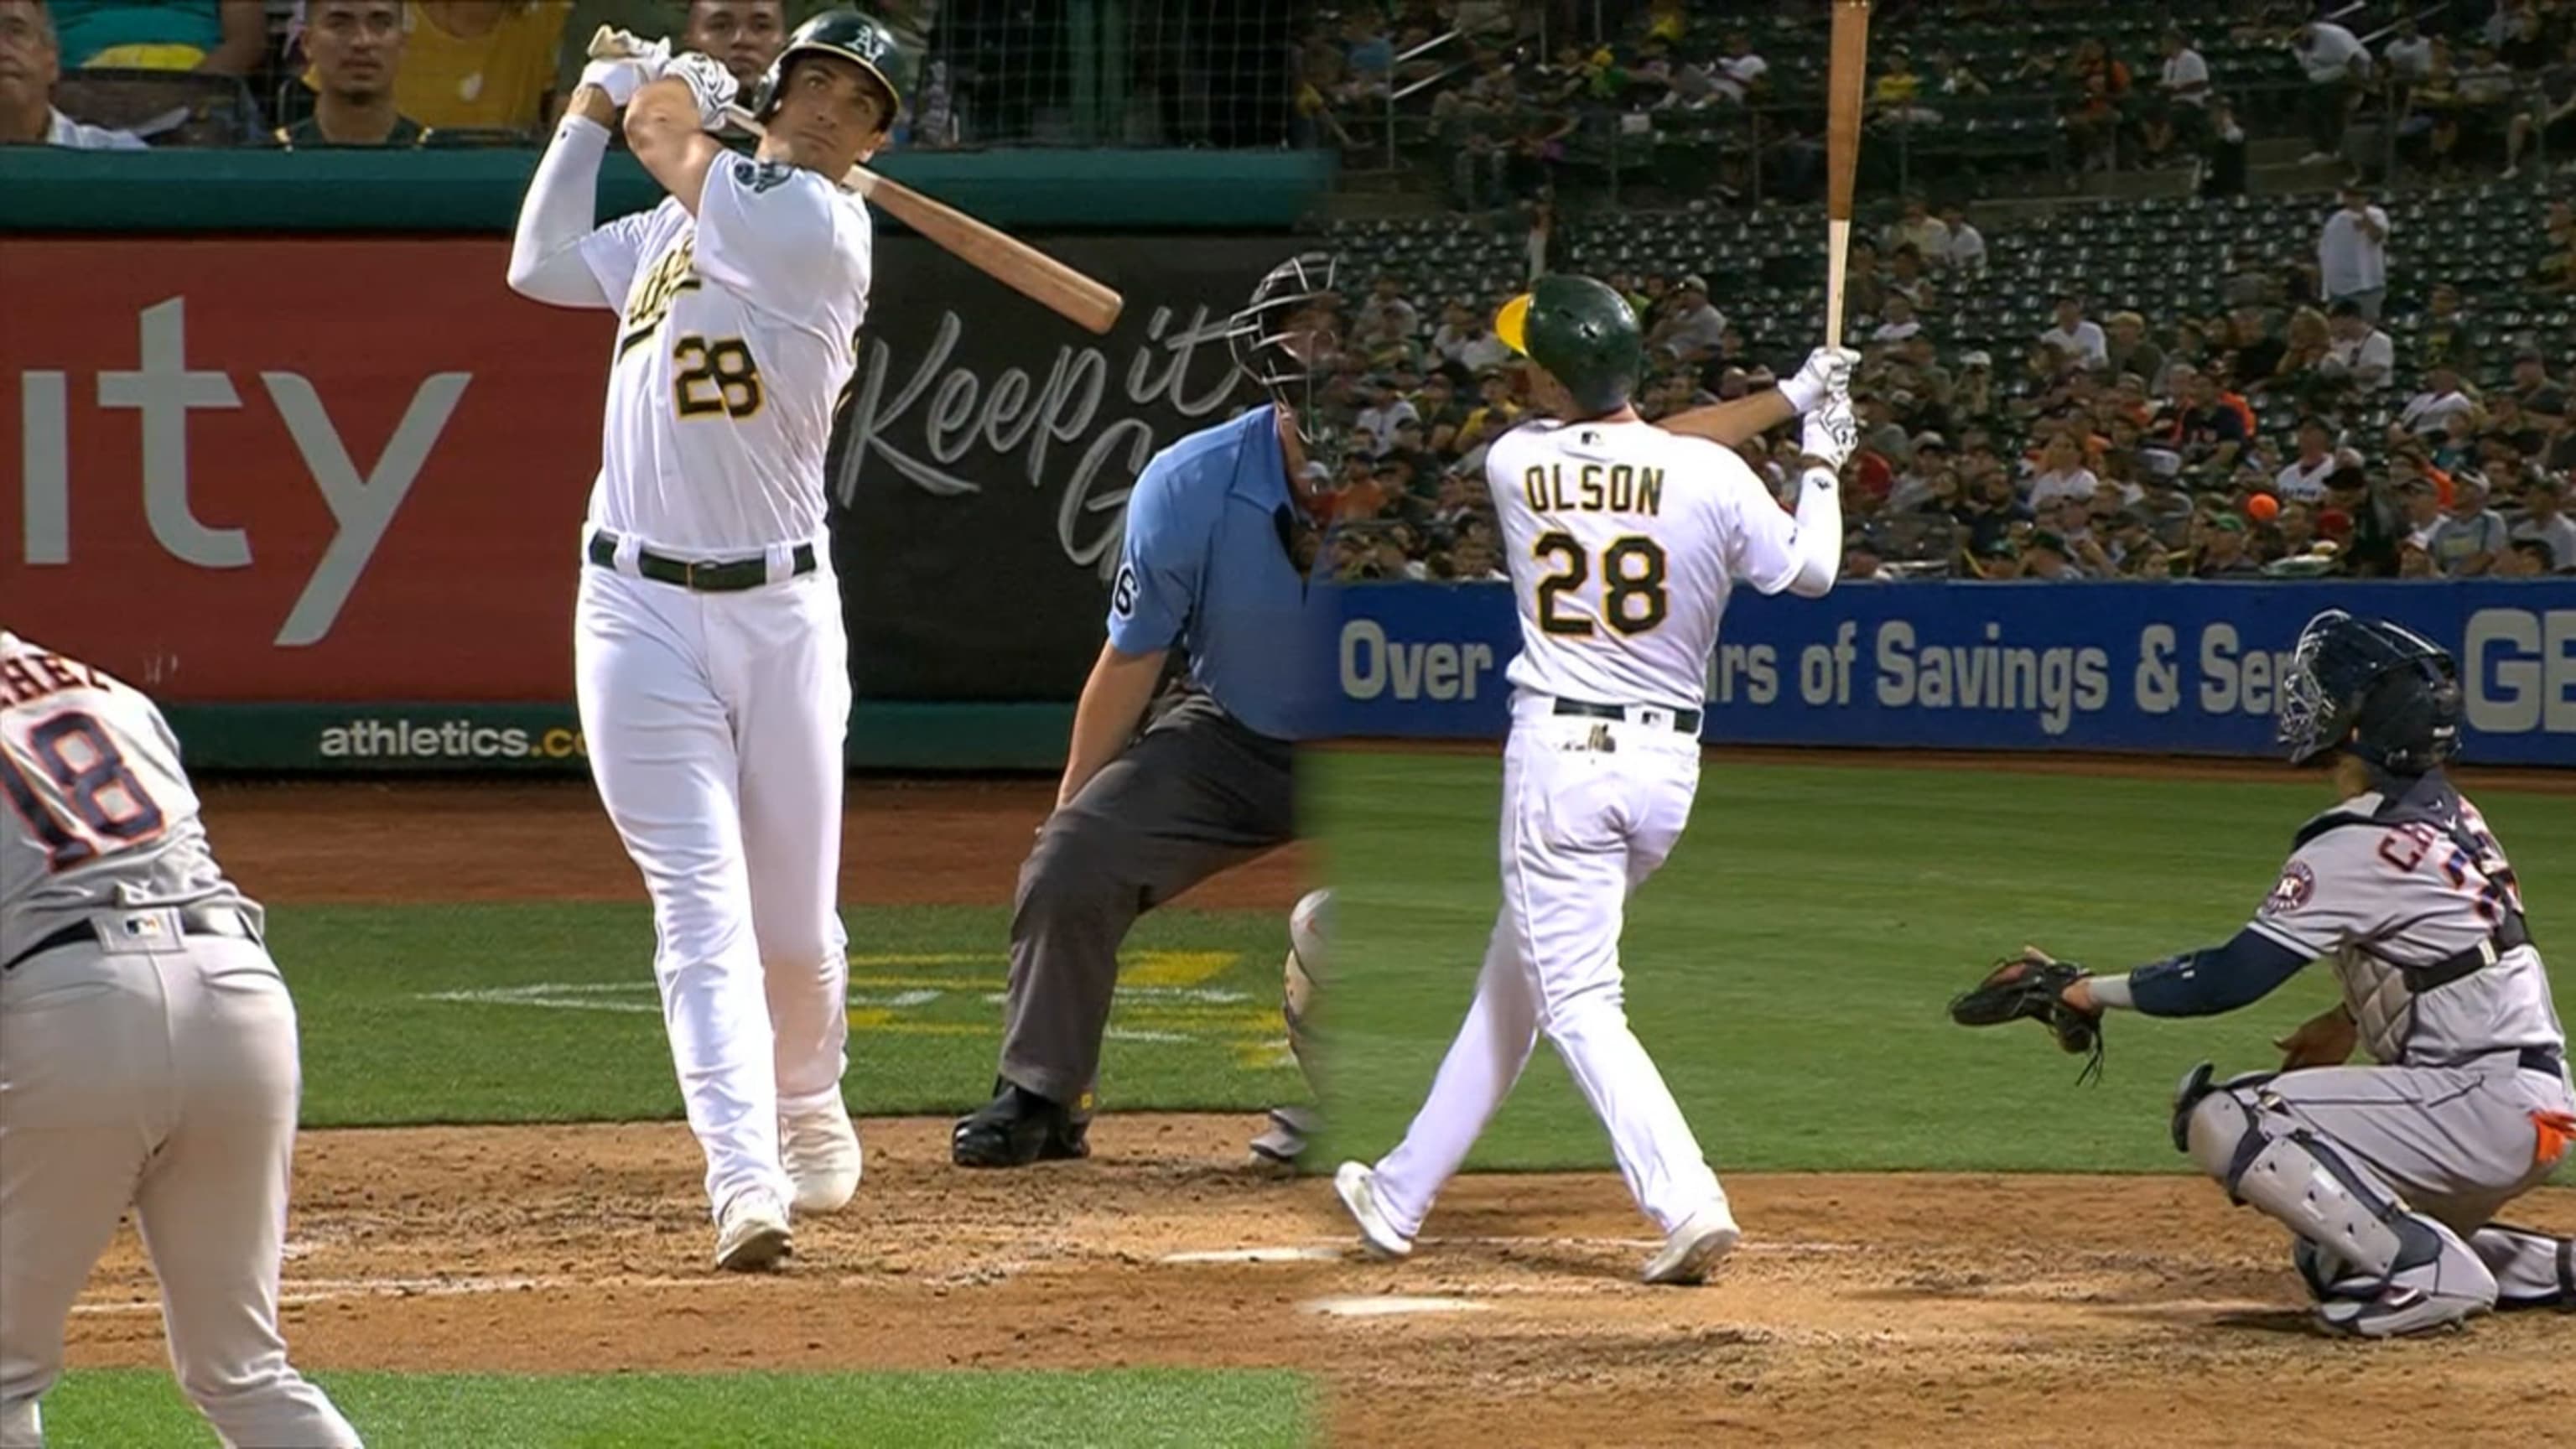 Record number of HRs hit at Oakland Coliseum